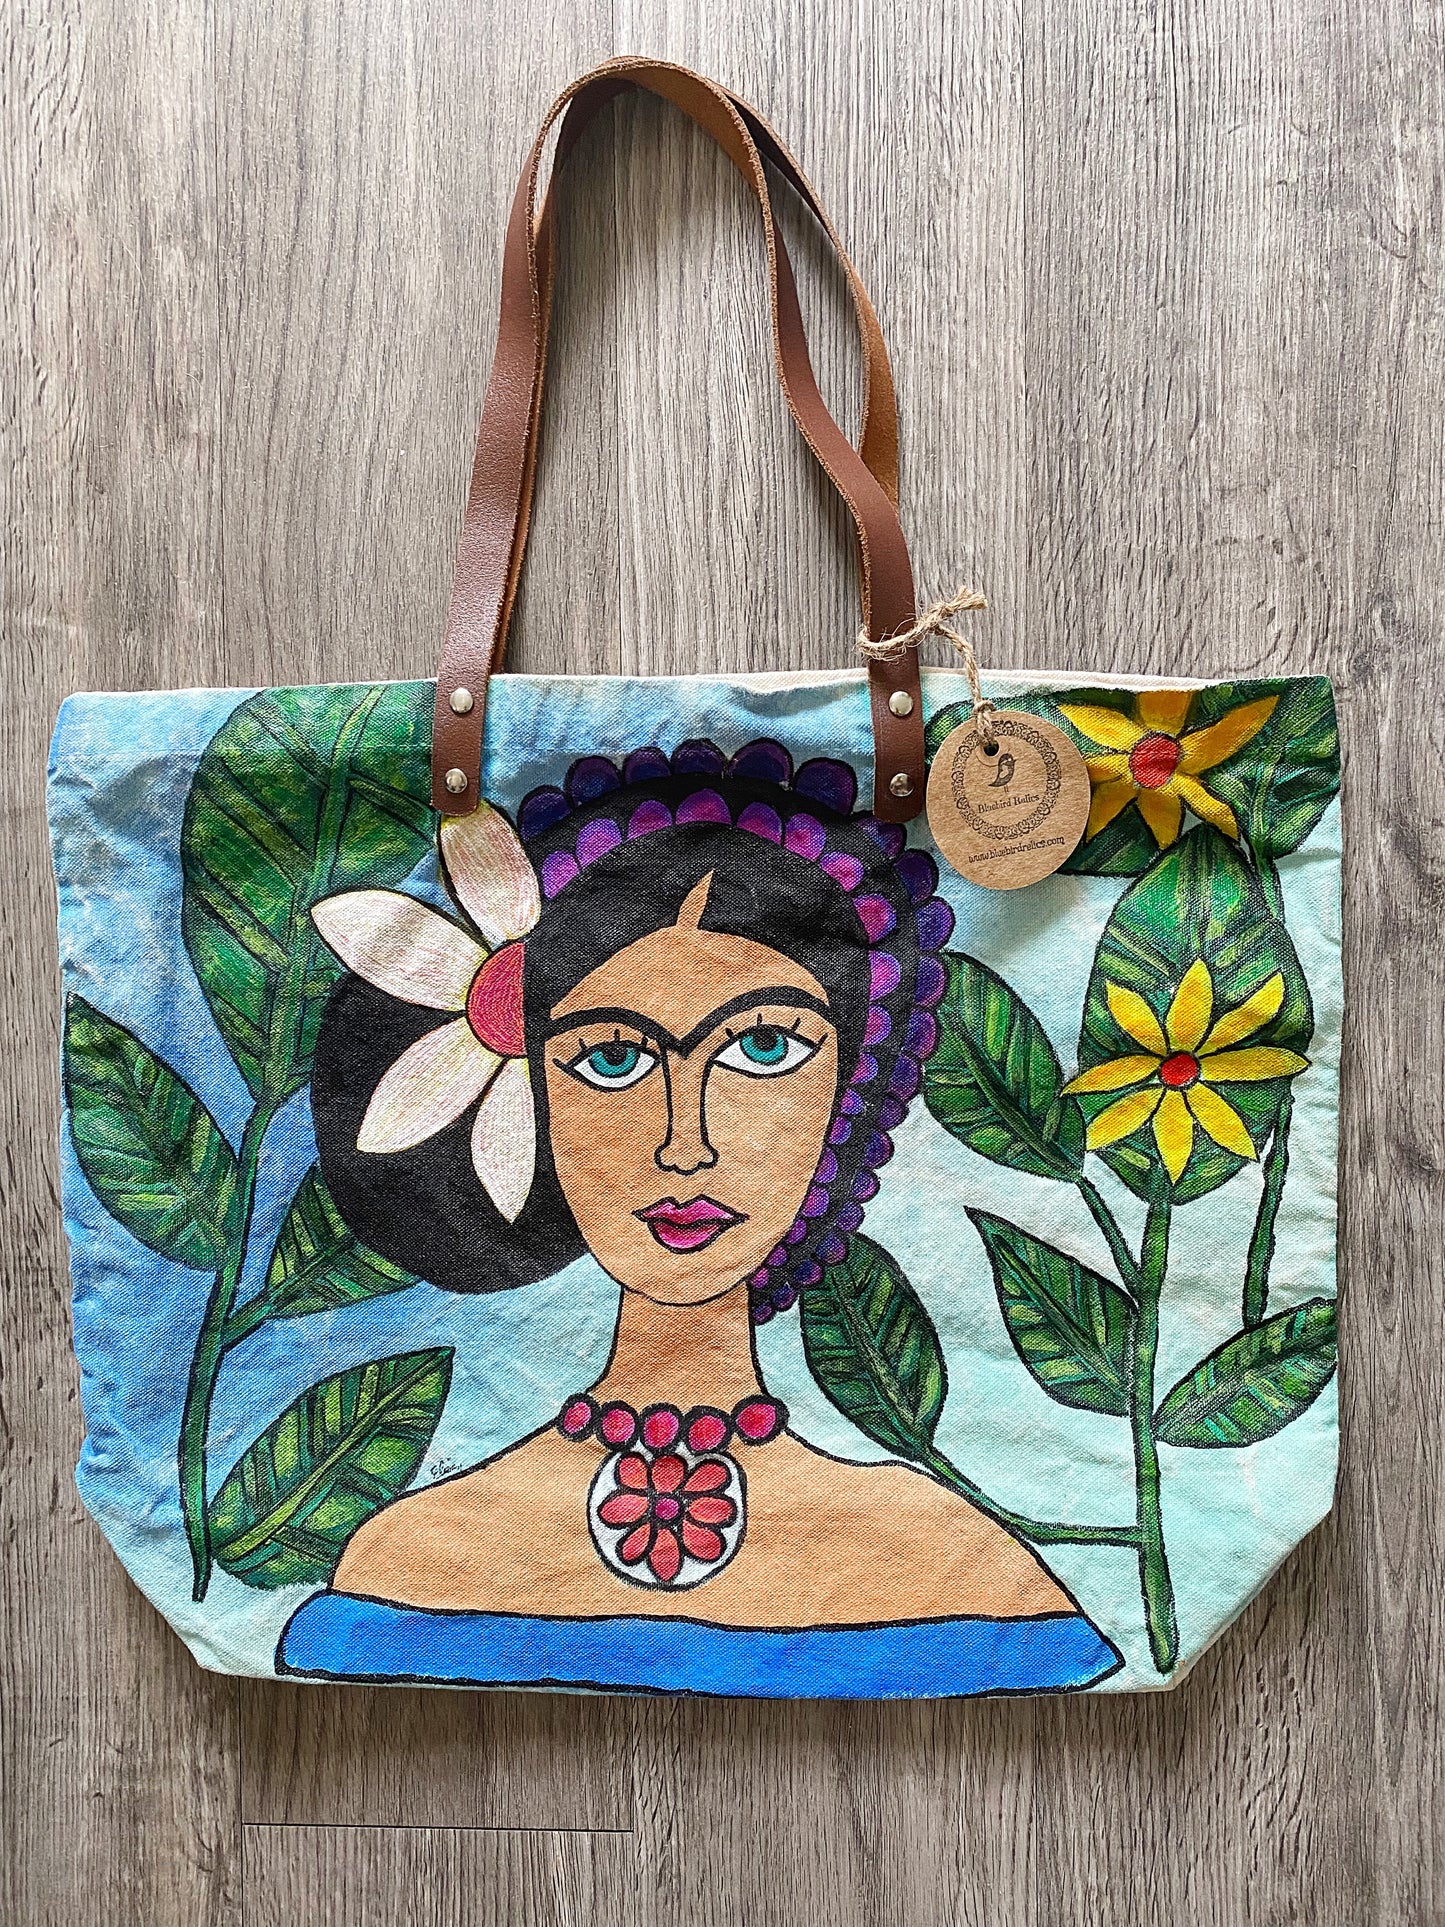 Frida Kahlo Inspired Hand Painted tote